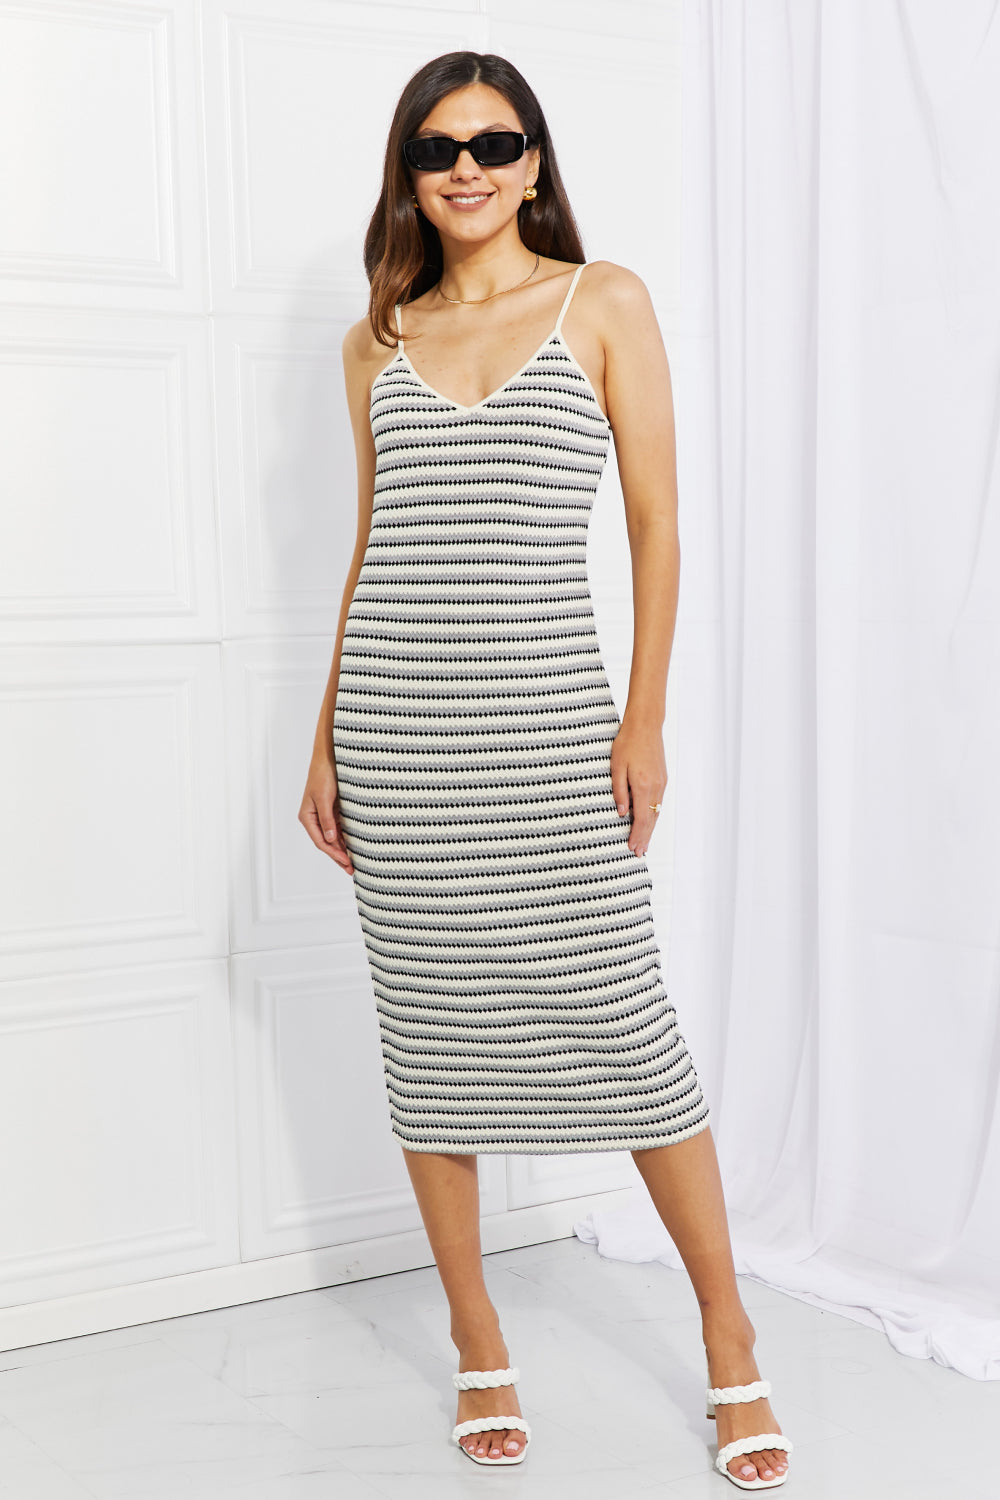 HYFVE One to Remember Striped Sleeveless Midi Dress Print on any thing USA/STOD clothes